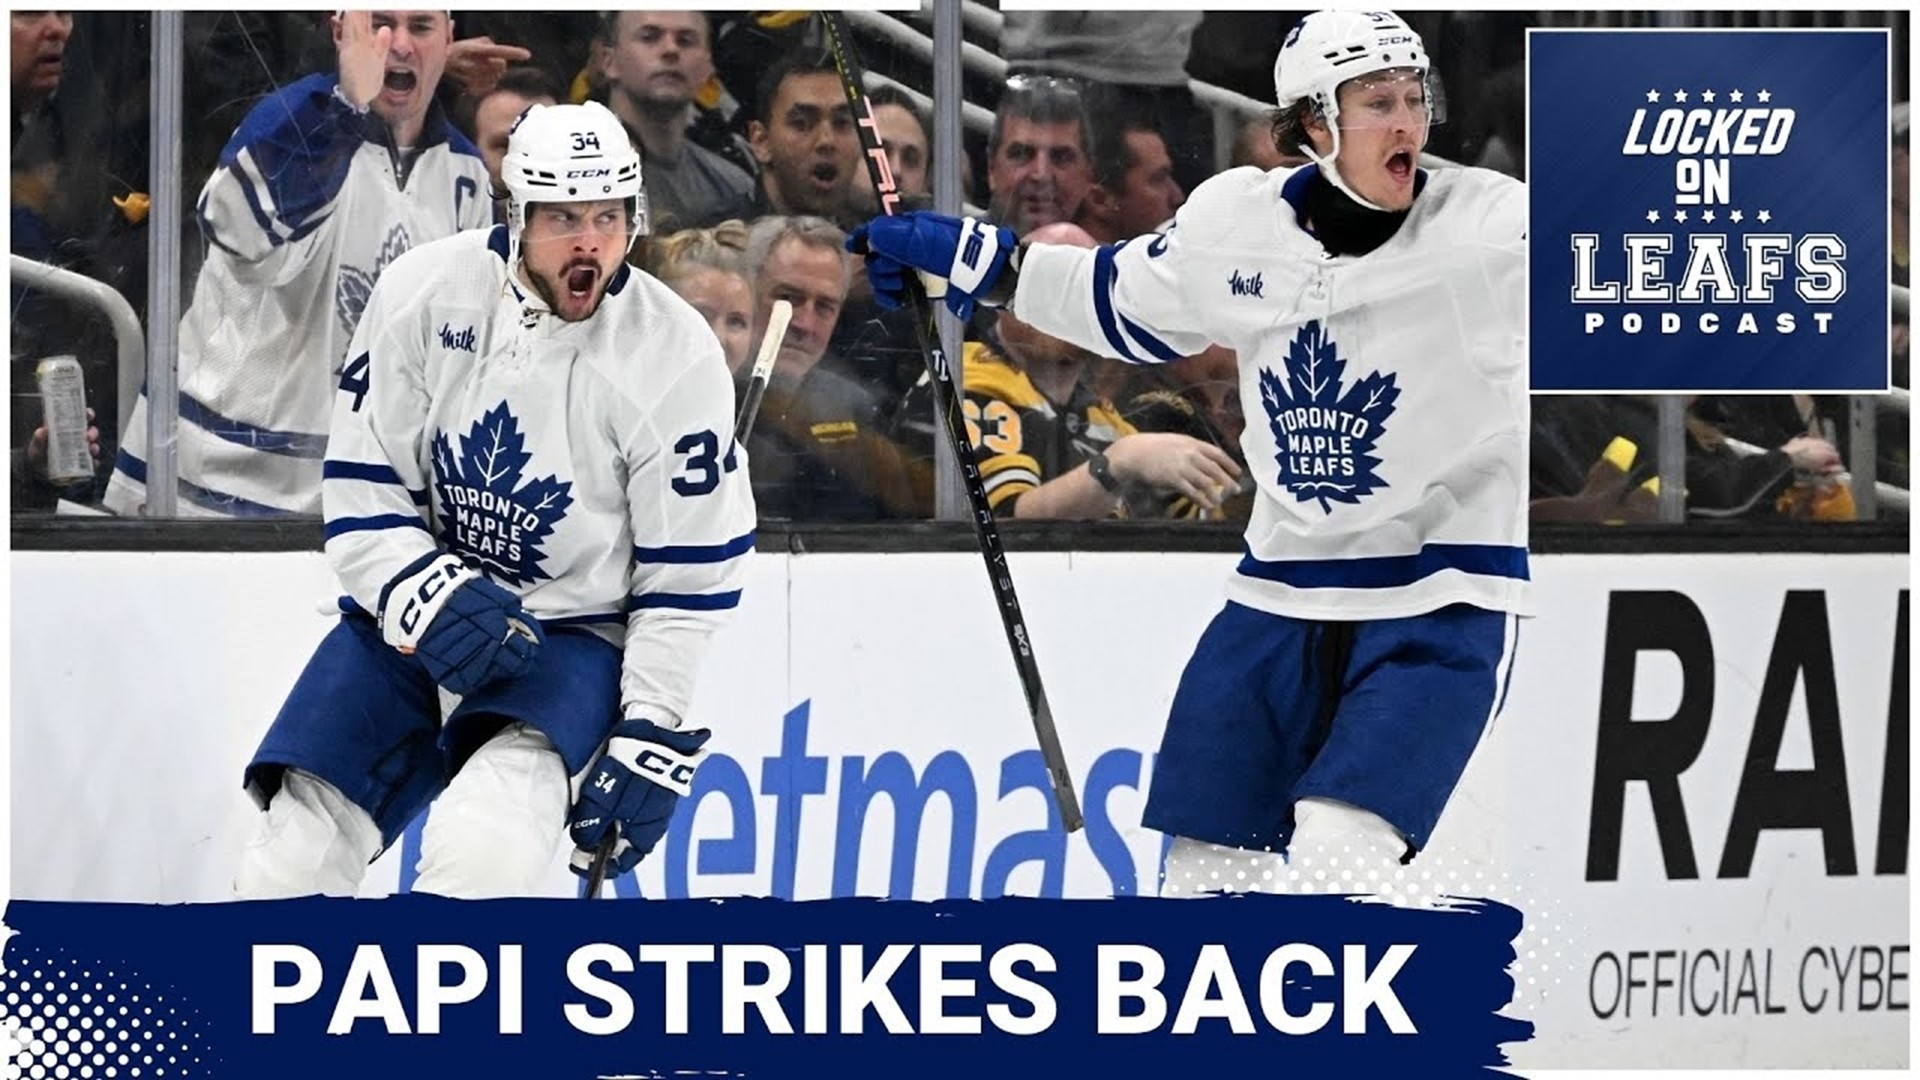 The Toronto Maple Leafs got back in their series against the Boston Bruins with a victory in Game 2 with Auston Matthews playing a big role in the win.